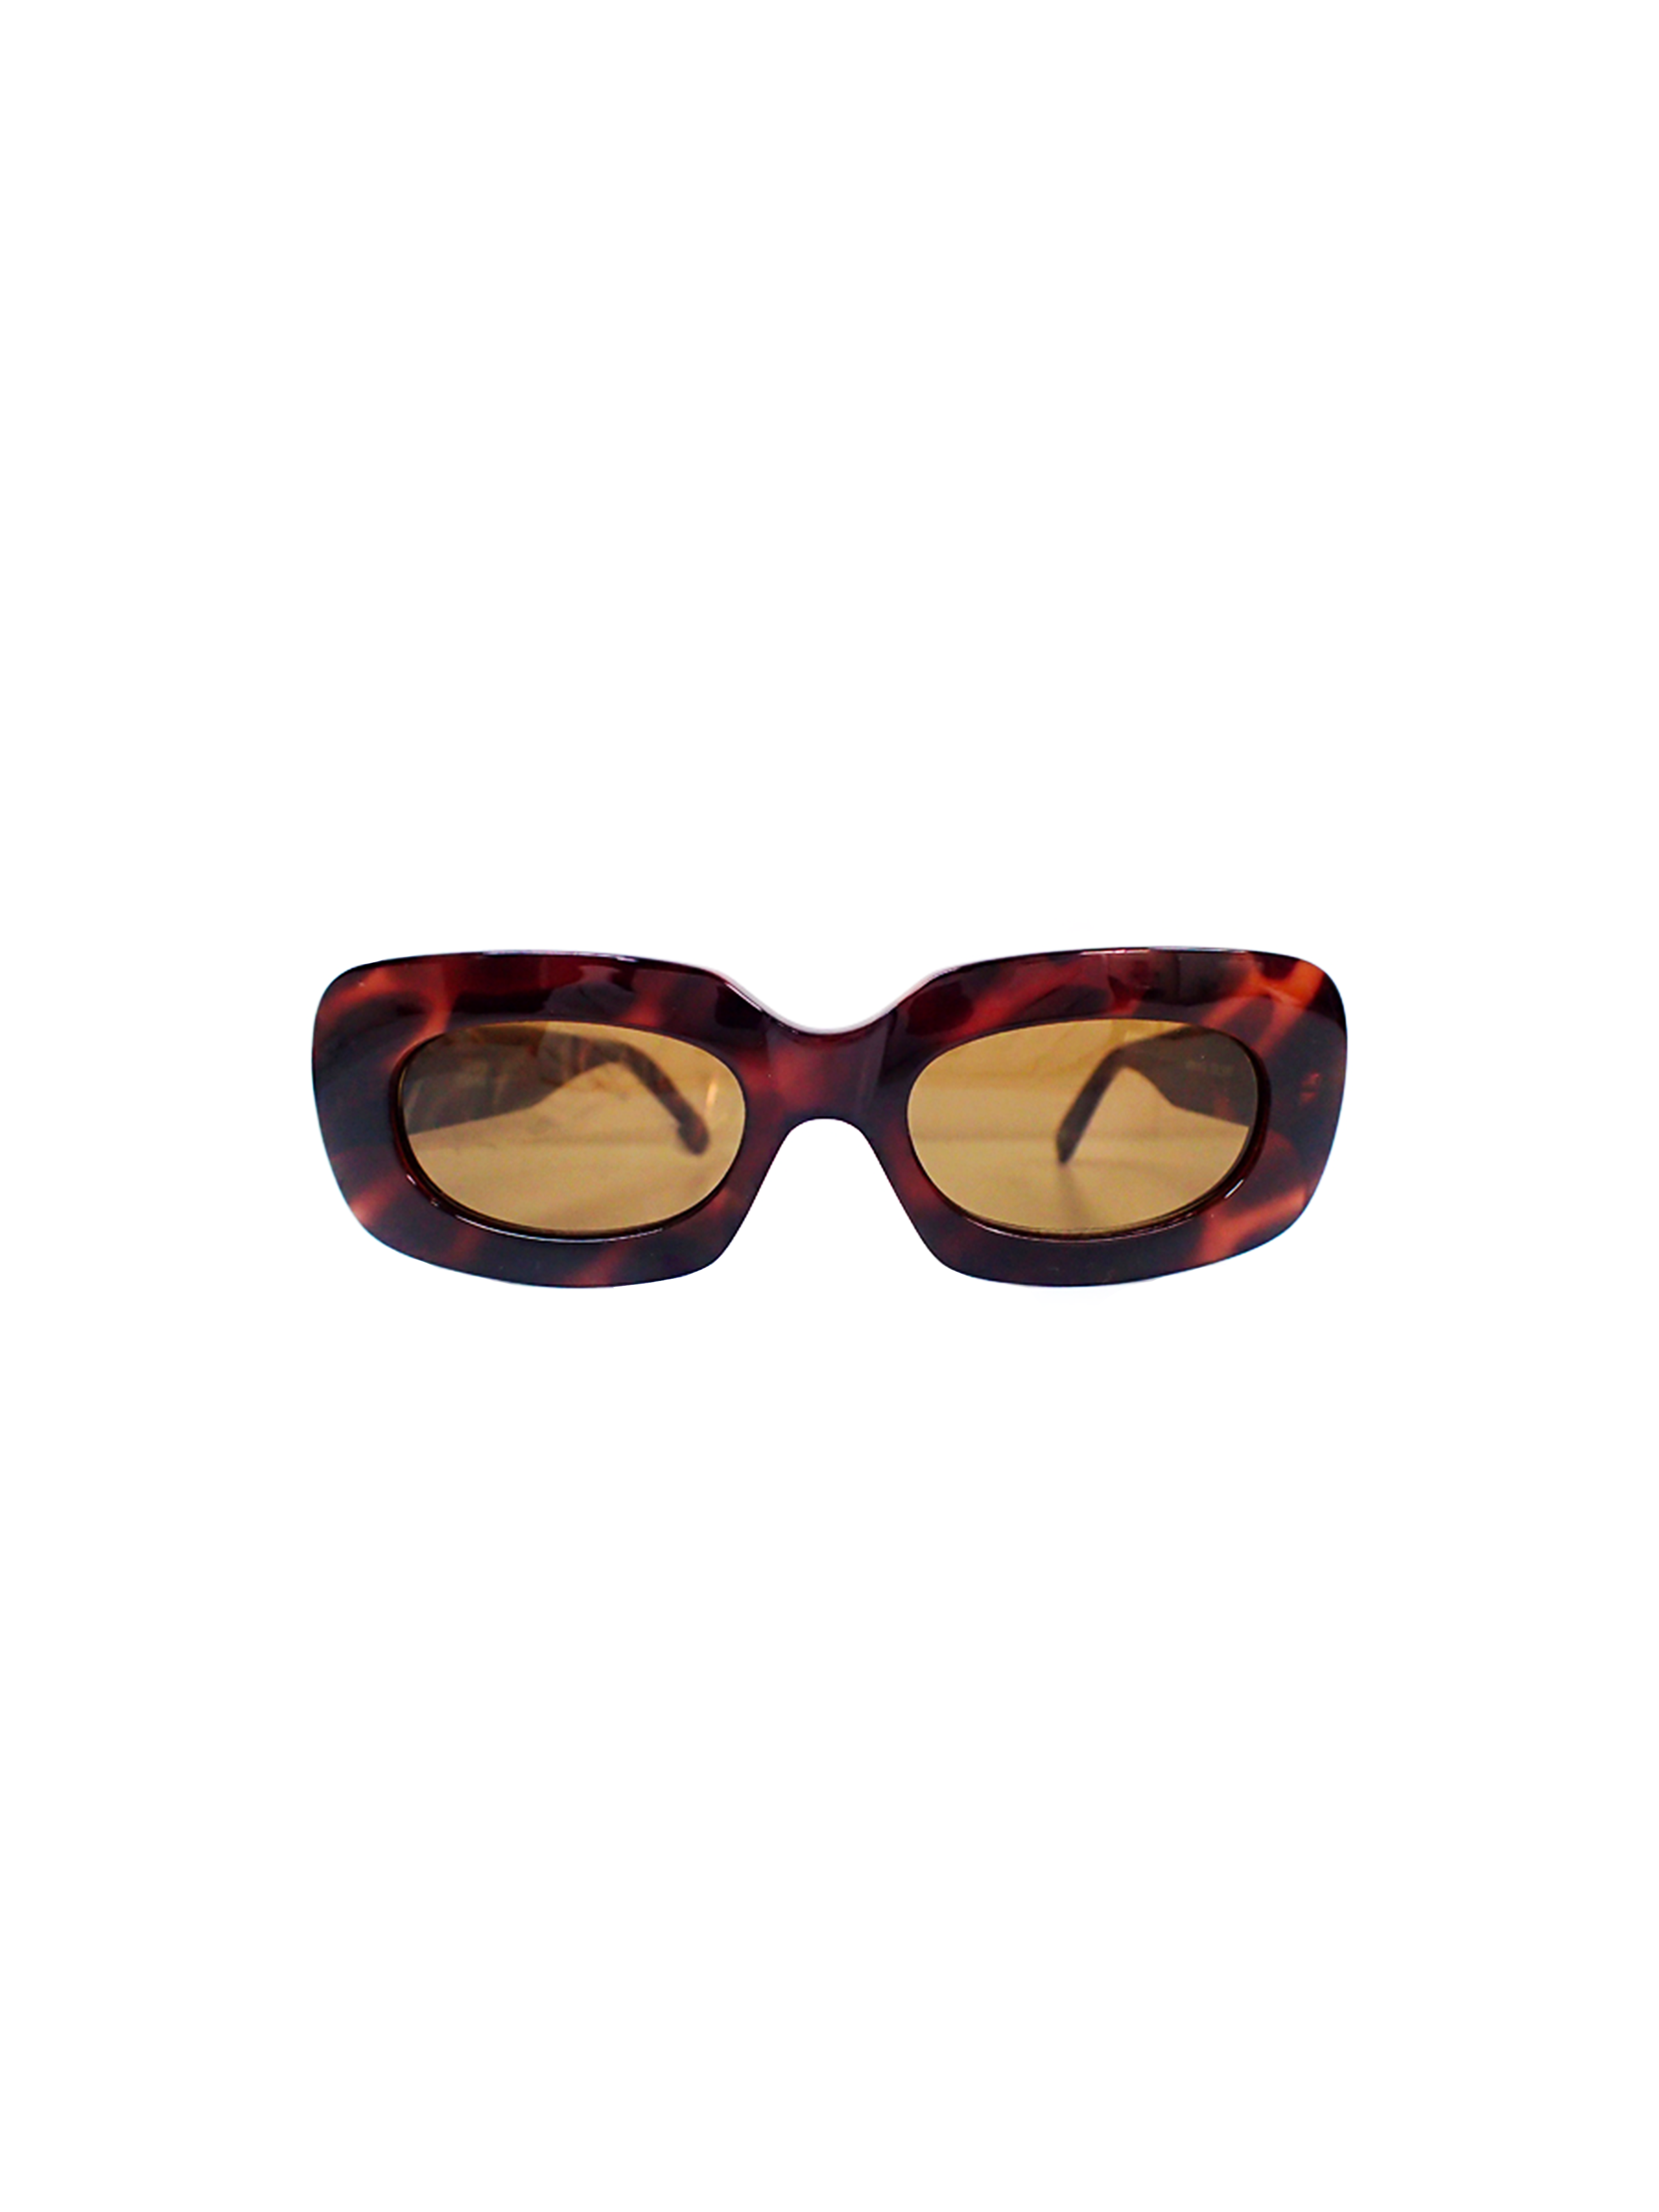 Versace 2000s Rare Brown Rounded Sunglasses